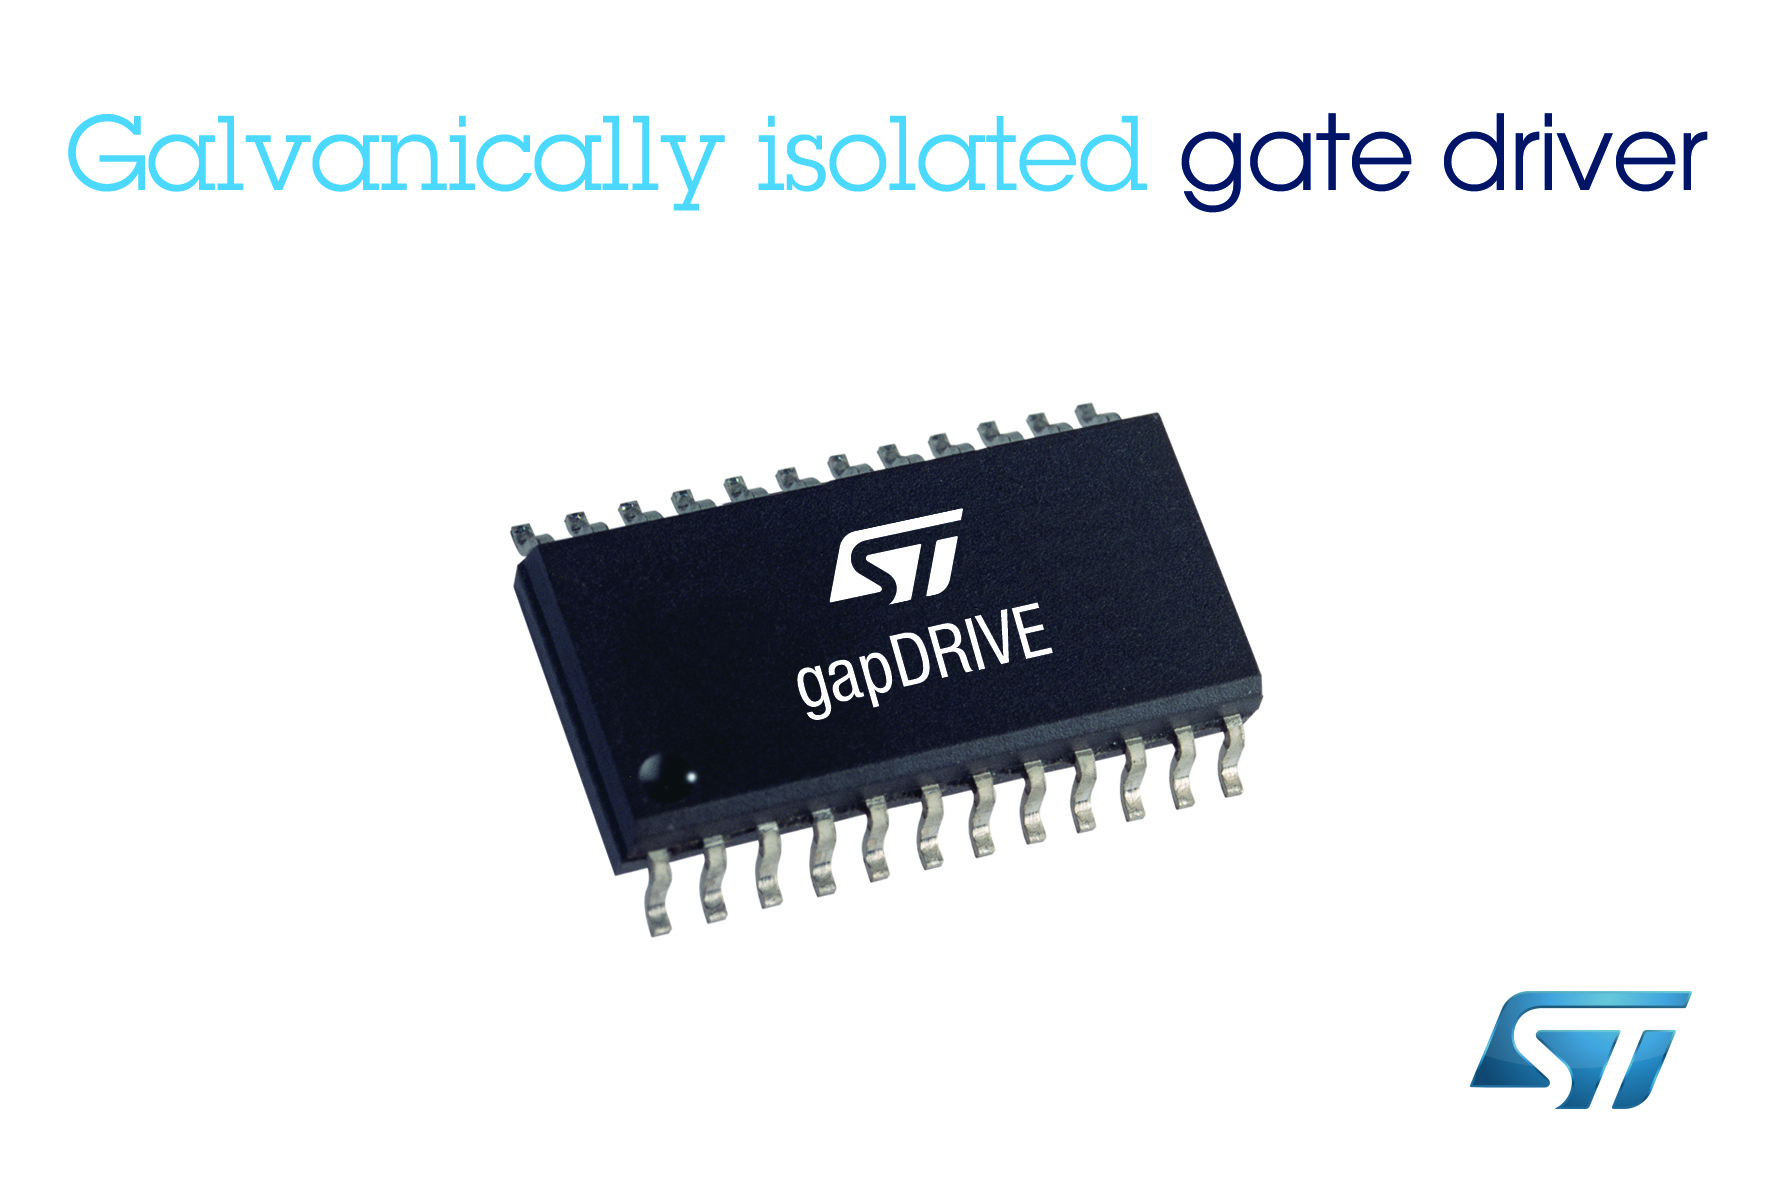 STMicro's gapDRIVE integrated gate drivers offer on-chip galvanic isolation